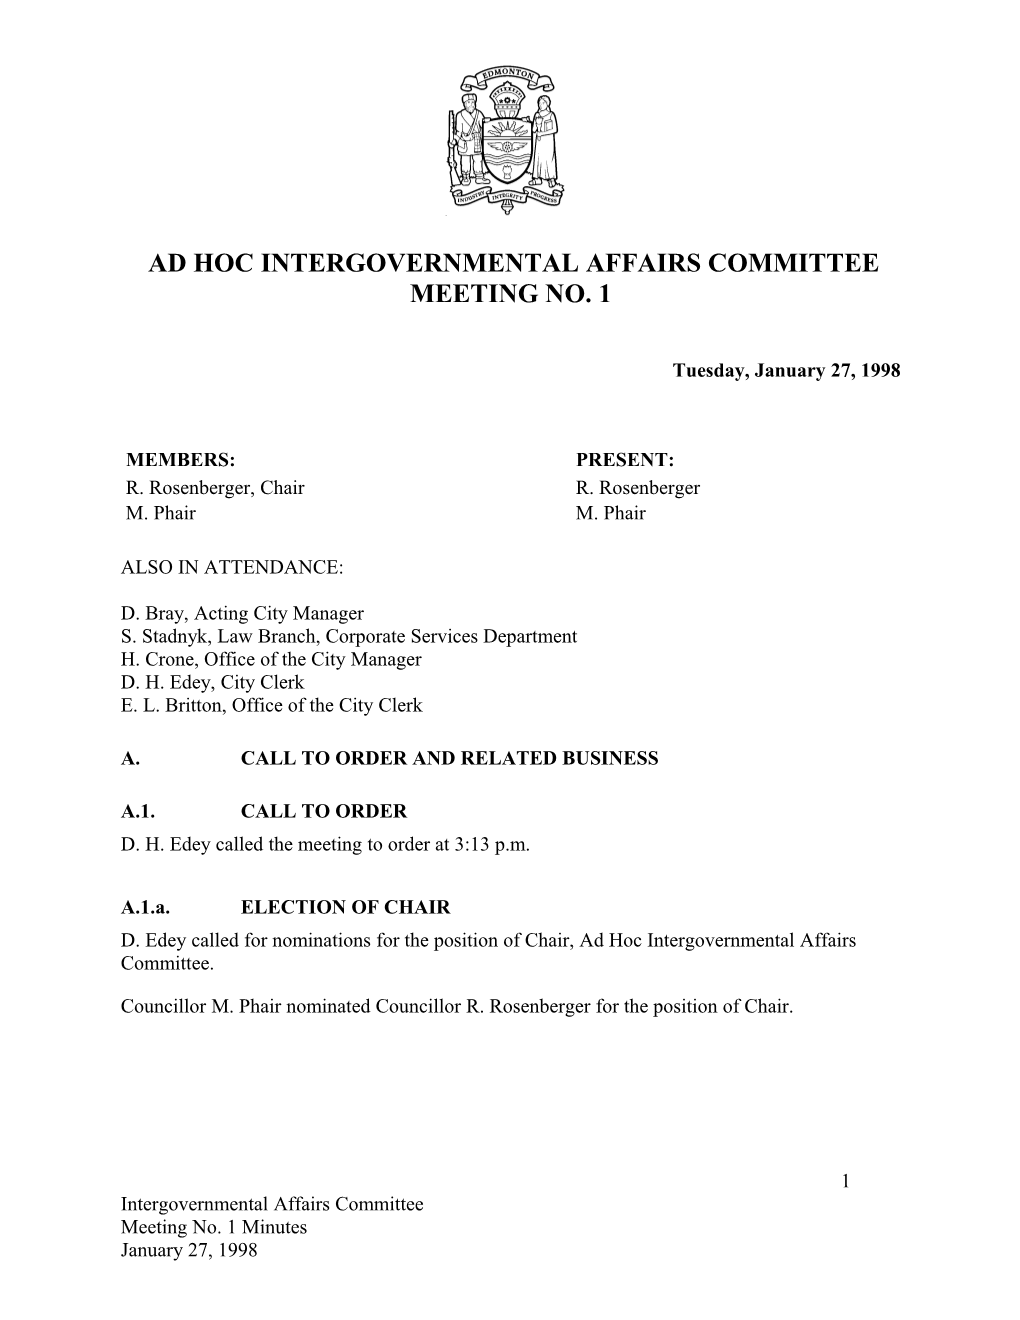 Minutes for Intergovernmental Affairs Committee January 27, 1998 Meeting